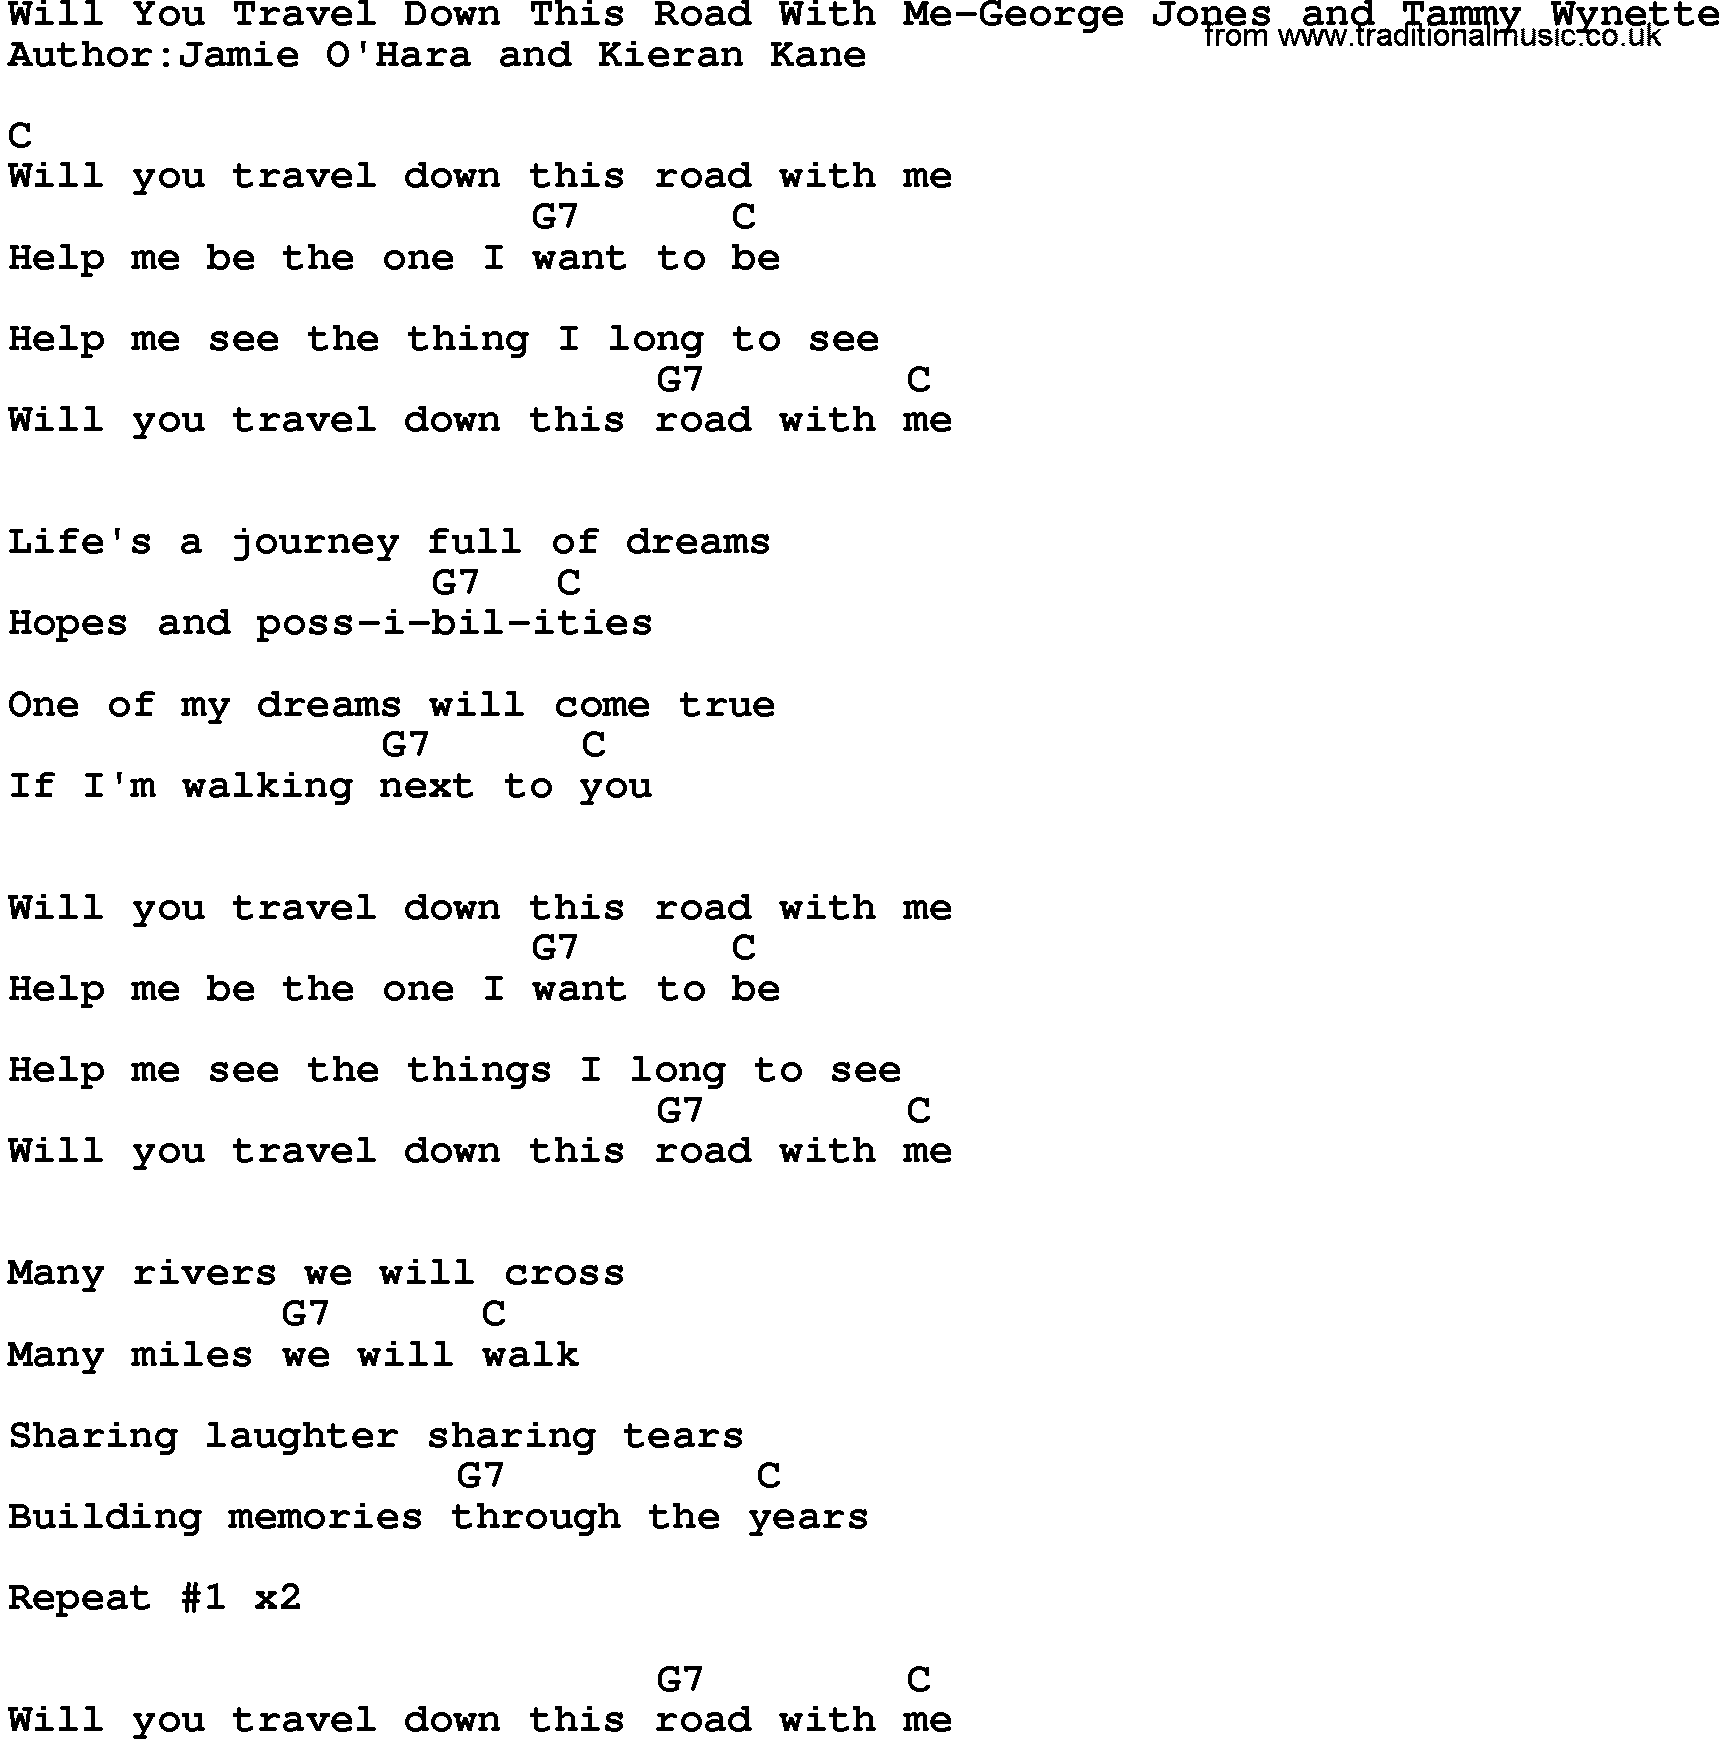 Country music song: Will You Travel Down This Road With Me-George Jones And Tammy Wynette lyrics and chords